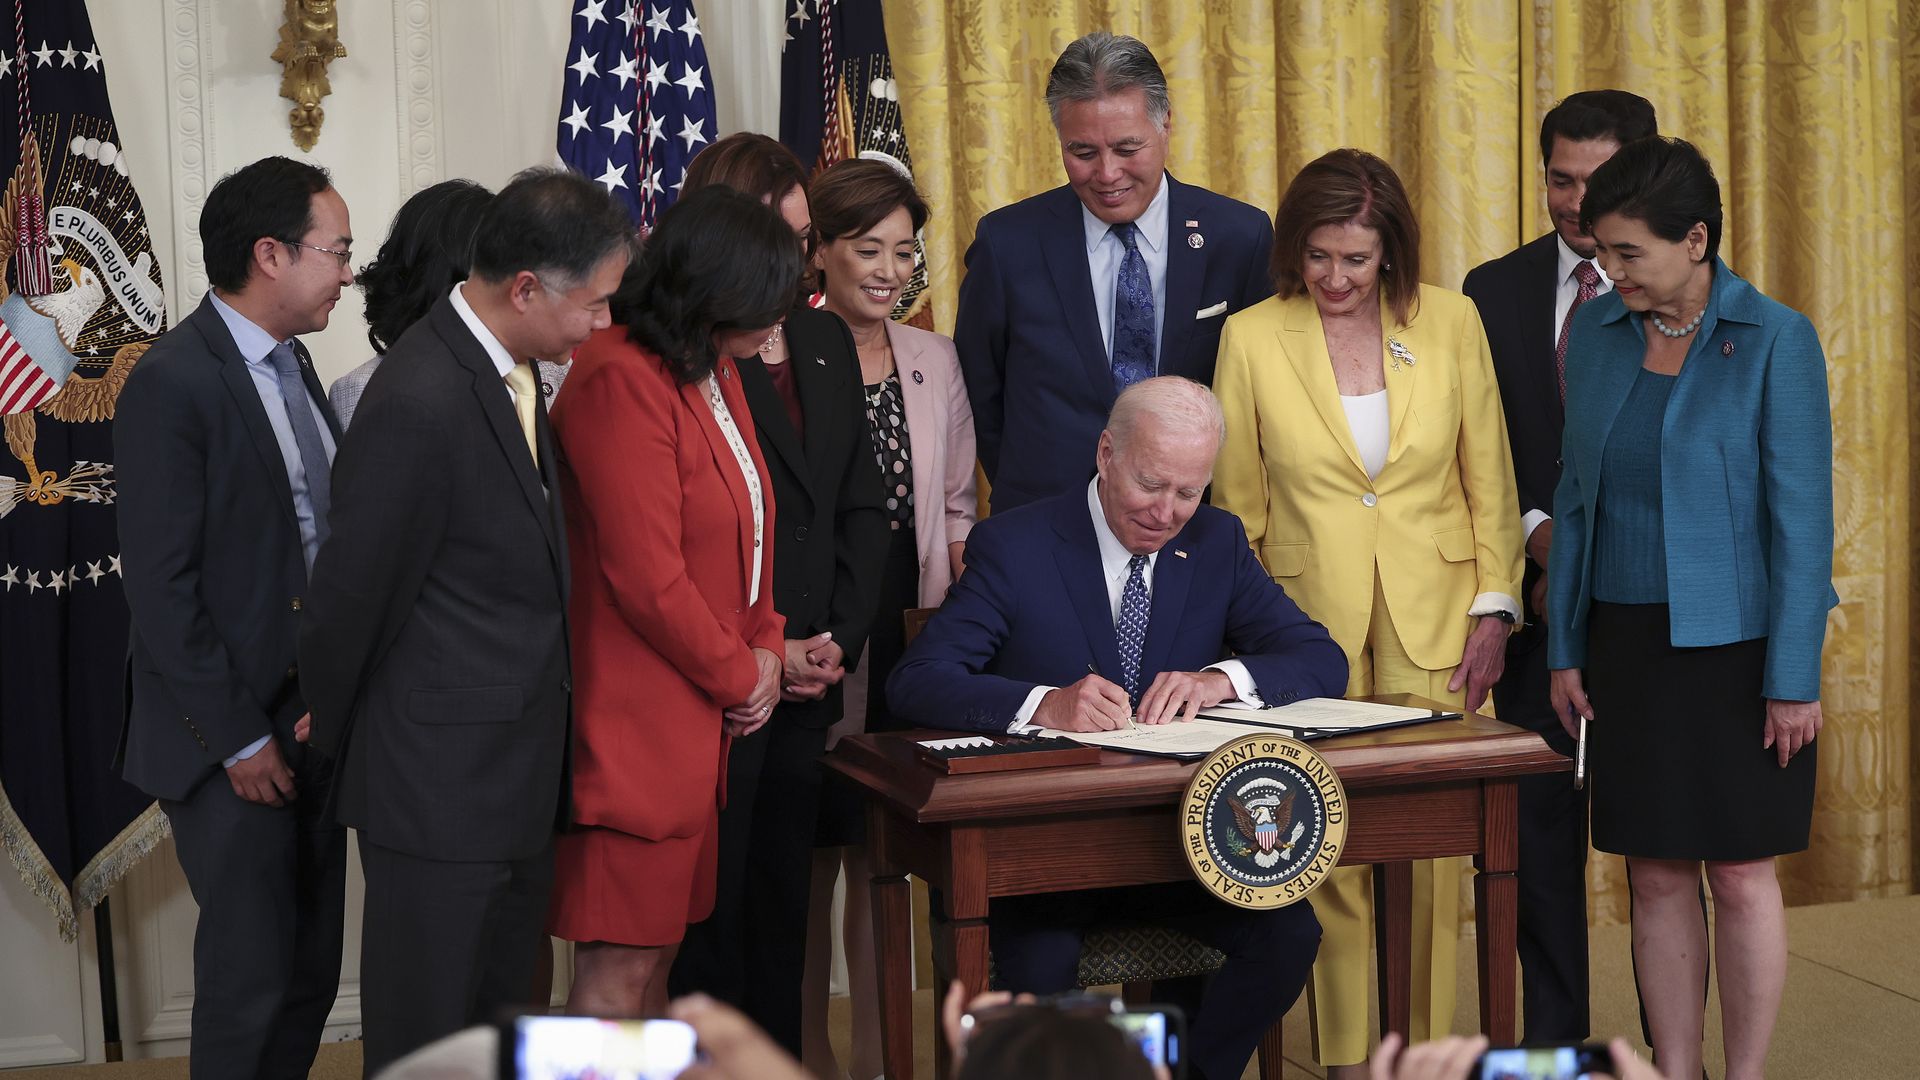 Photo of Joe Biden signing a bill at a table while Congress members stand around him watching